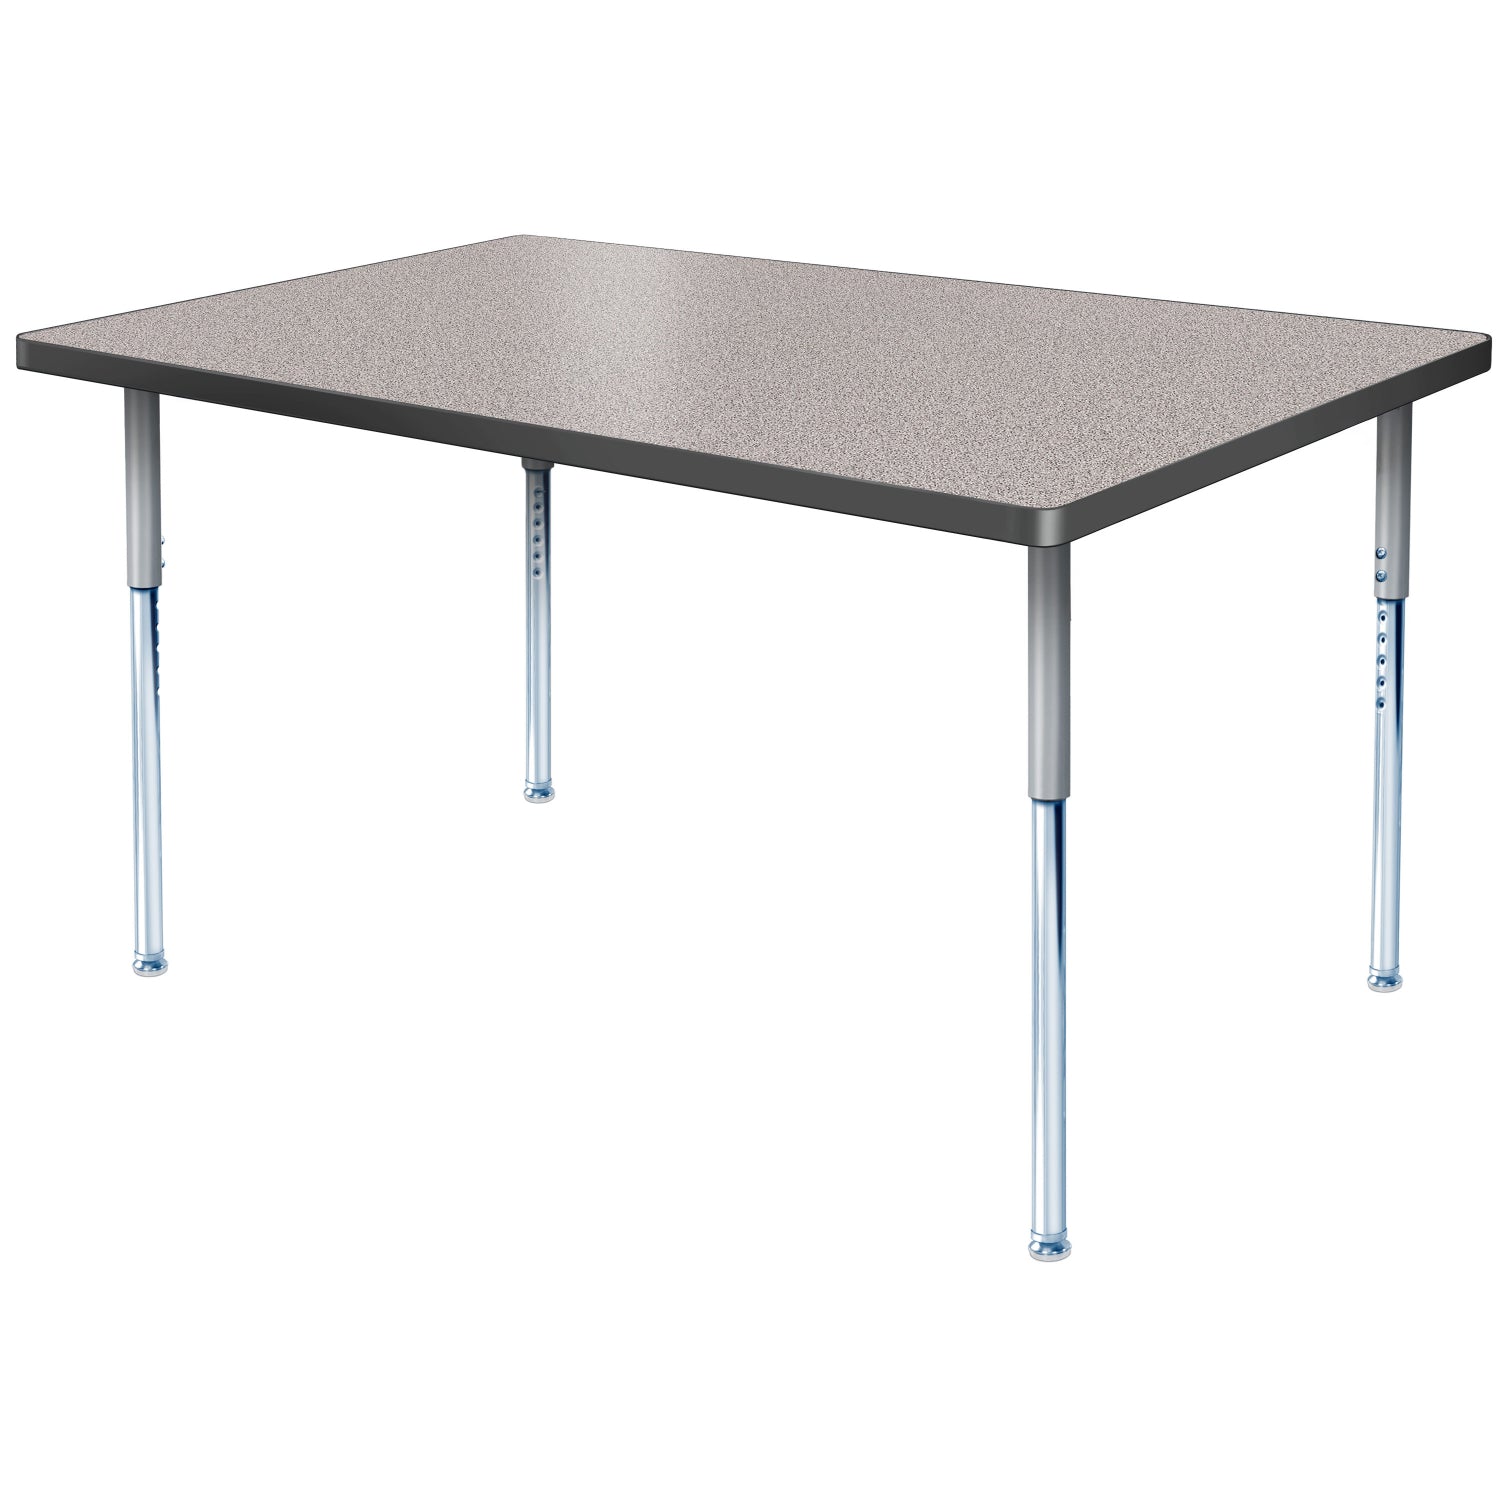 Modern Classic Series 30 x 60" Rectangular Activity Table with High Pressure Laminate Top, Adjustable Height Legs